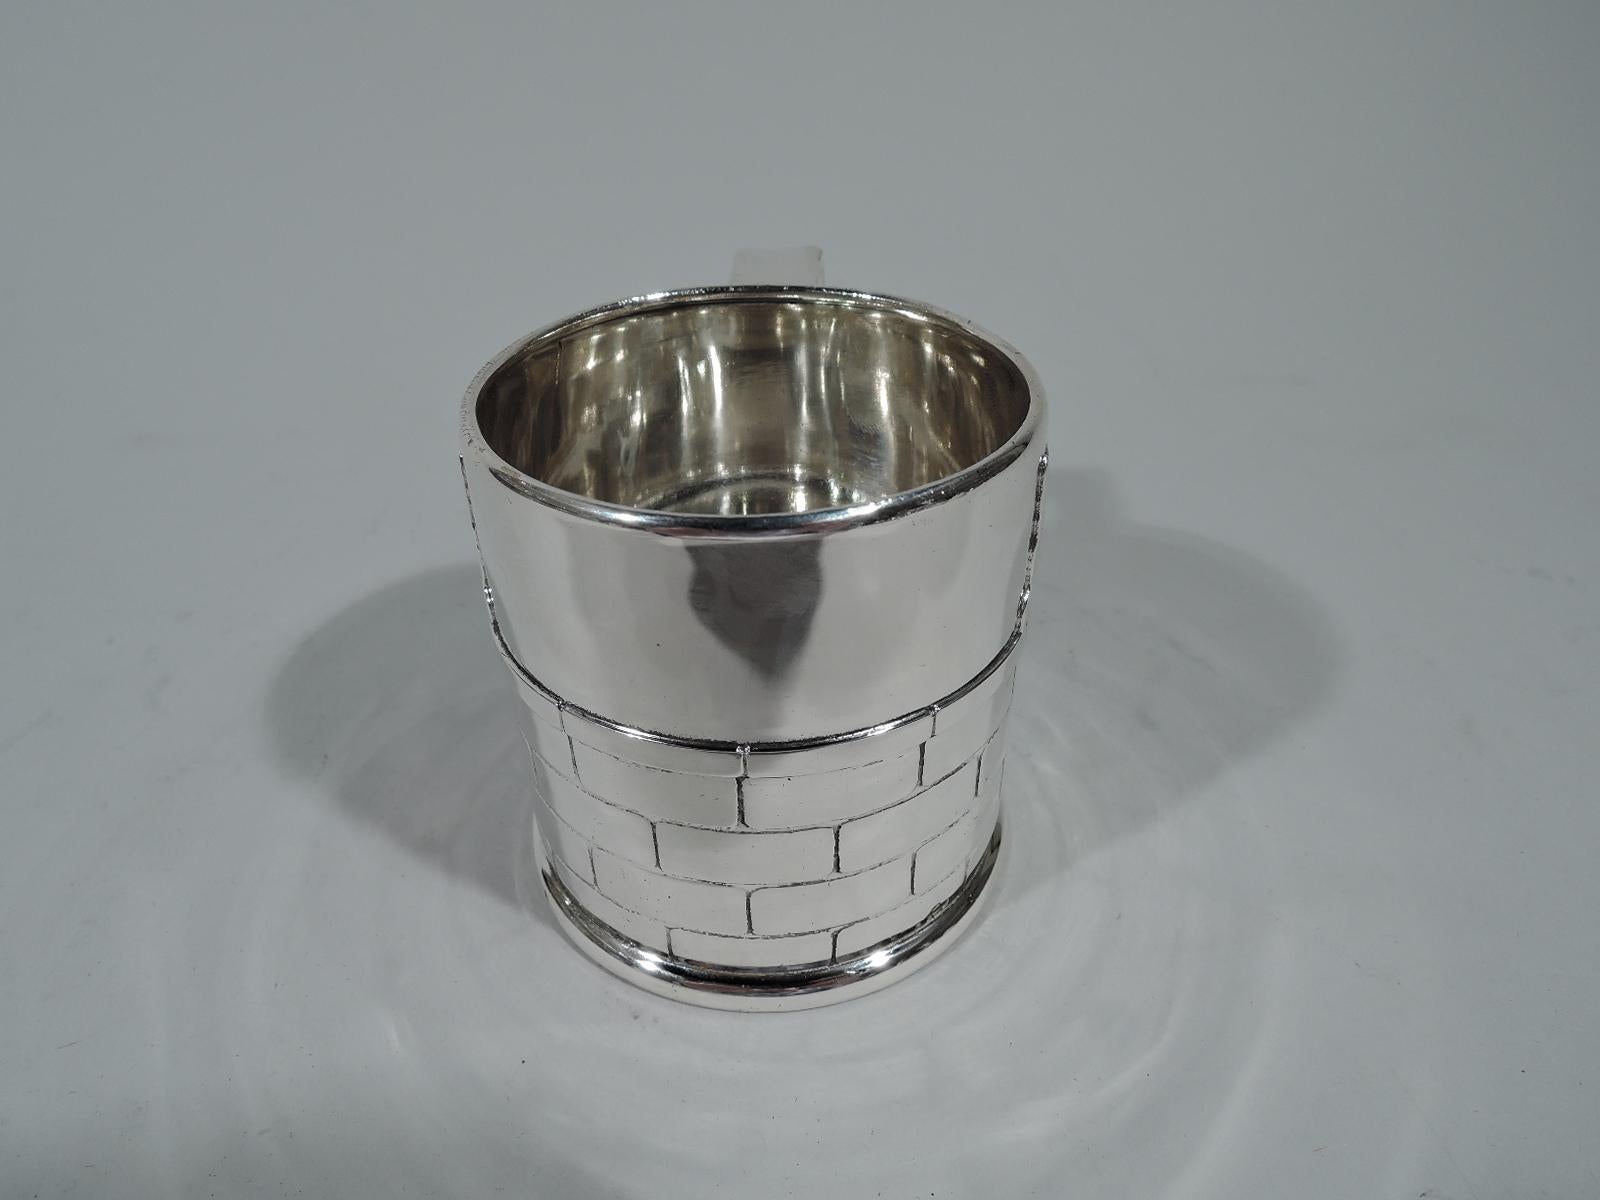 Edwardian sterling silver baby cup with peekaboo kitty cat. Made by Tiffany & Co. in New York. Drum form with molded base and bracket handle. Two heads with pointy ears and fat paws peep above a brick wall. Fine evocation of the intense and